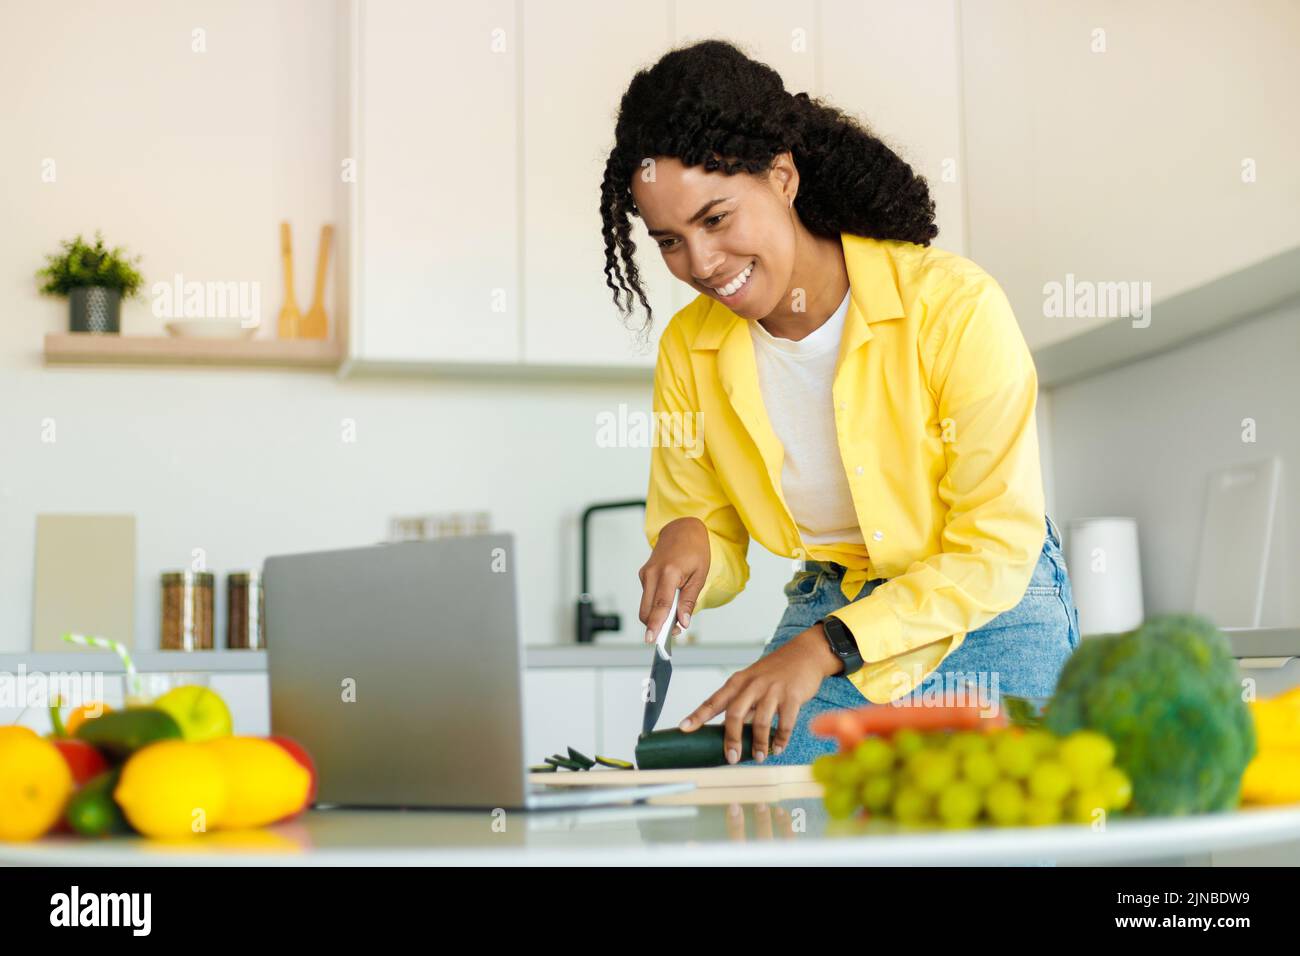 New recipe, food blog. Happy young african american lady cutting vegetables in kitchen interior, using laptop Stock Photo